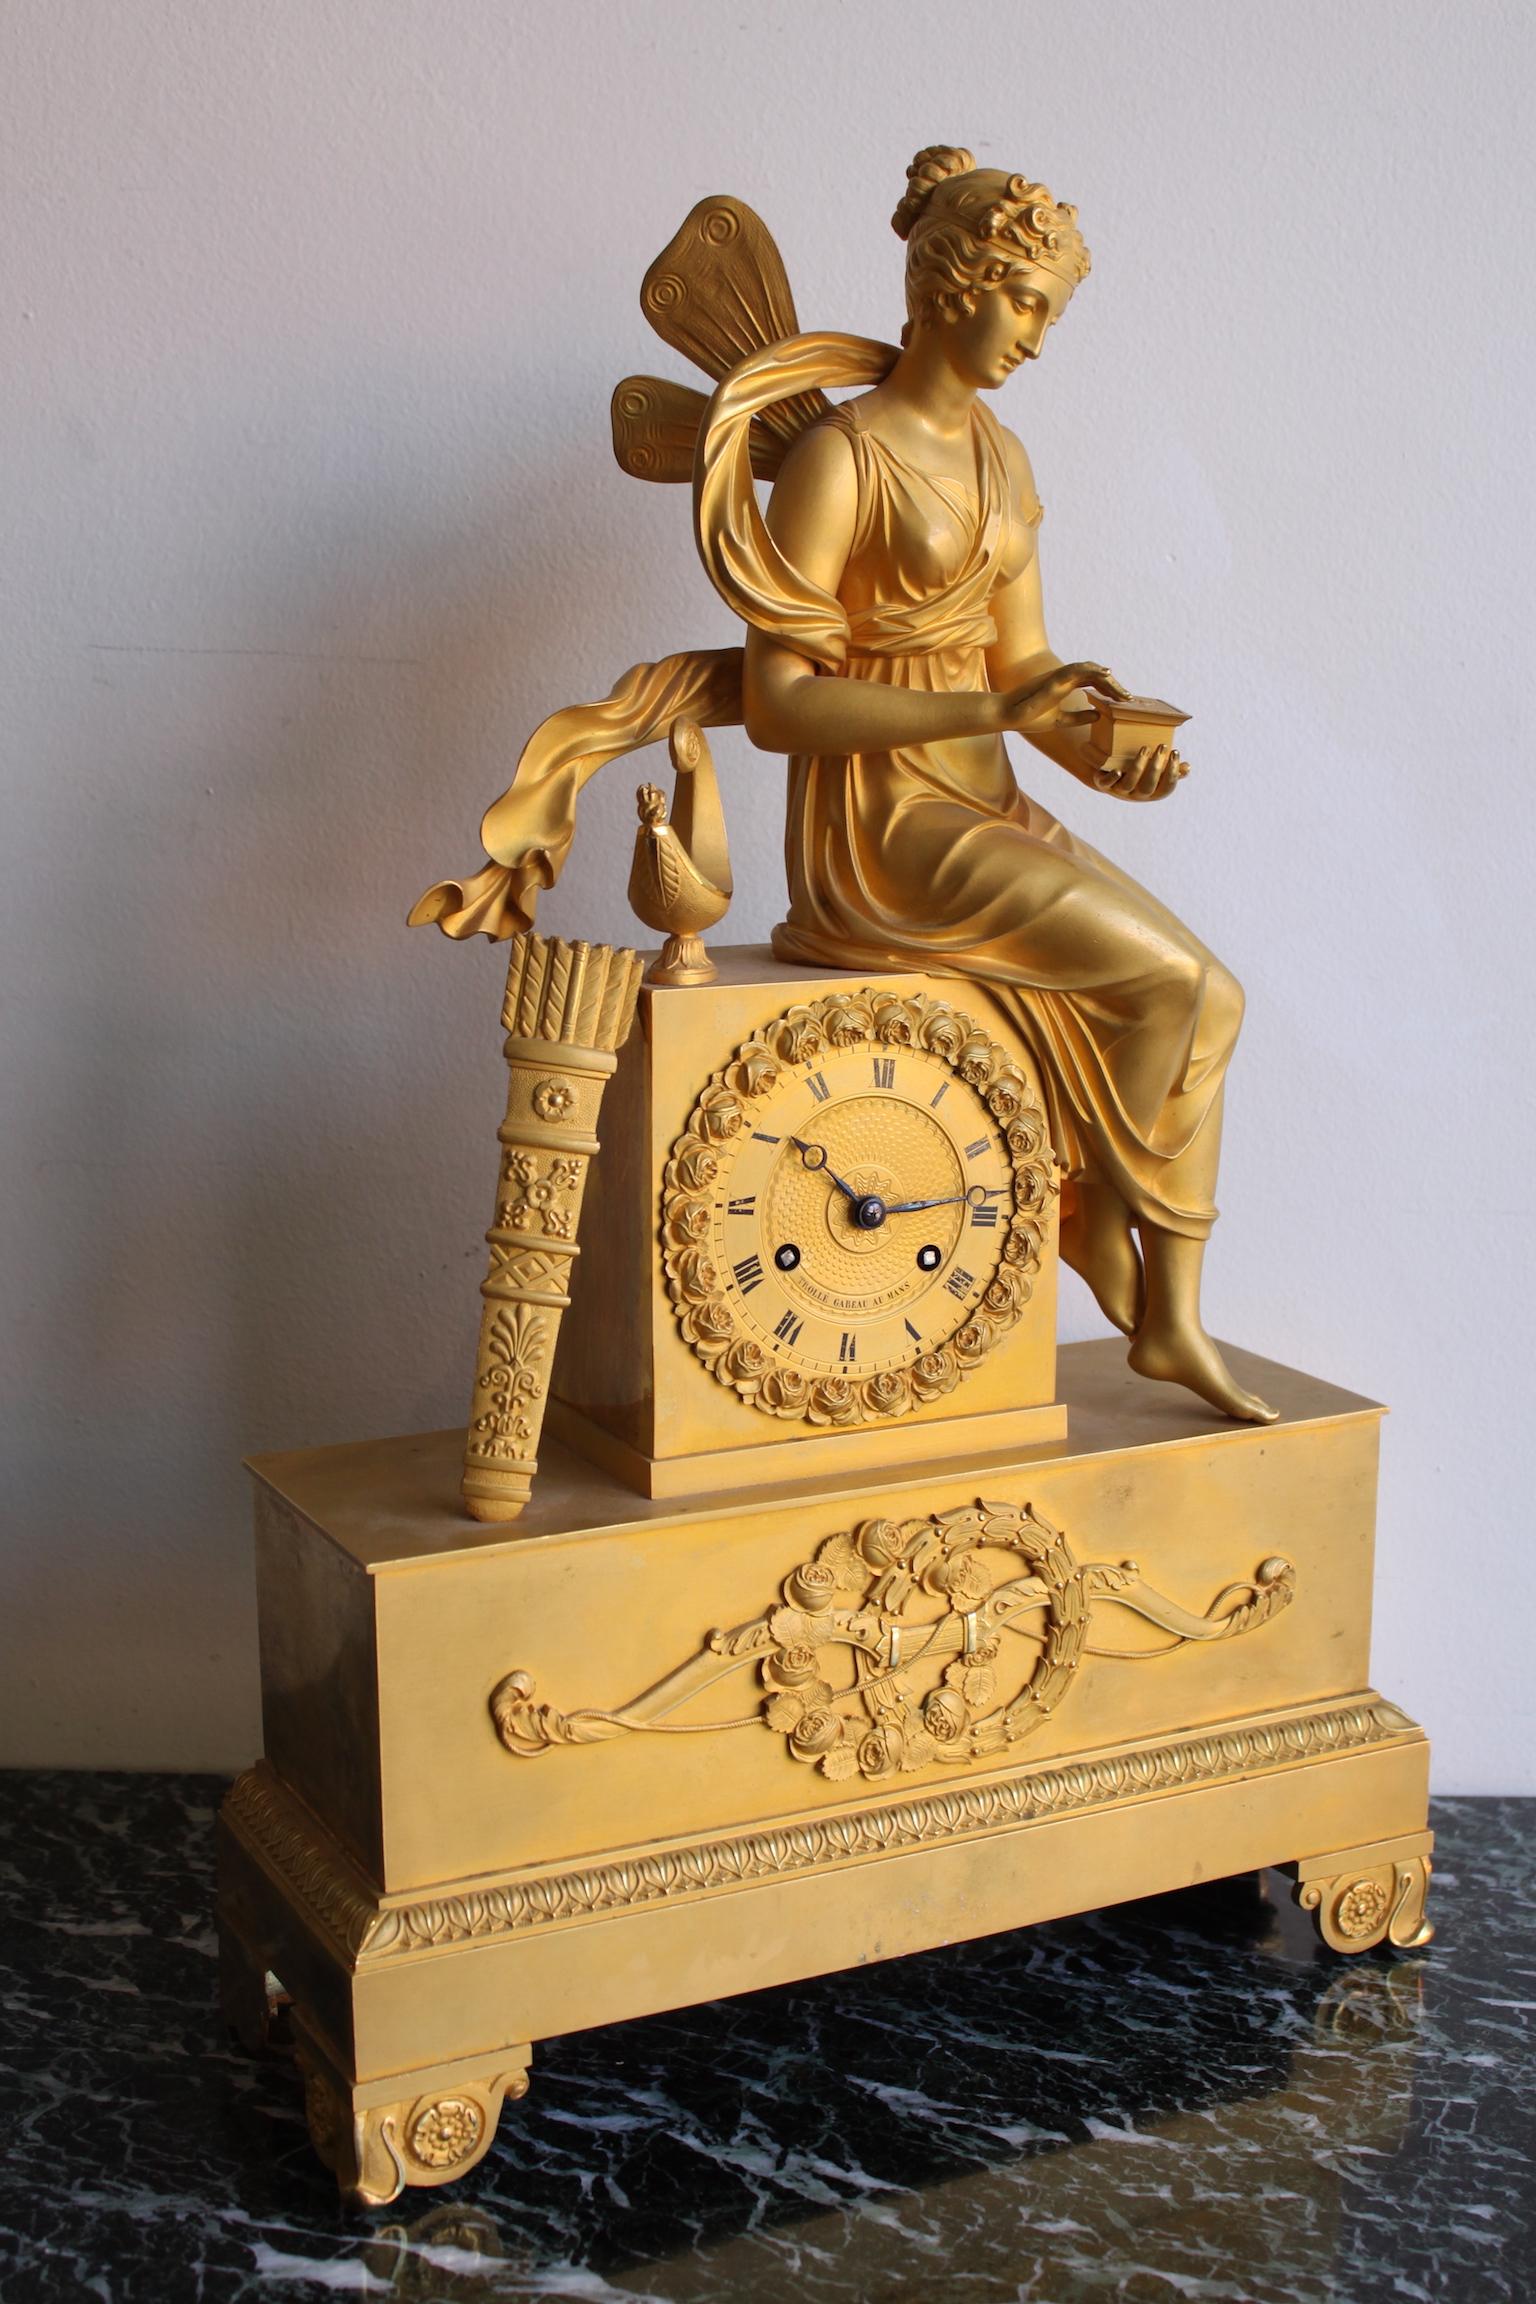 19th century gilt bronze clock depicting a woman with Pandora 's box.
In good condition.
Dial signed 